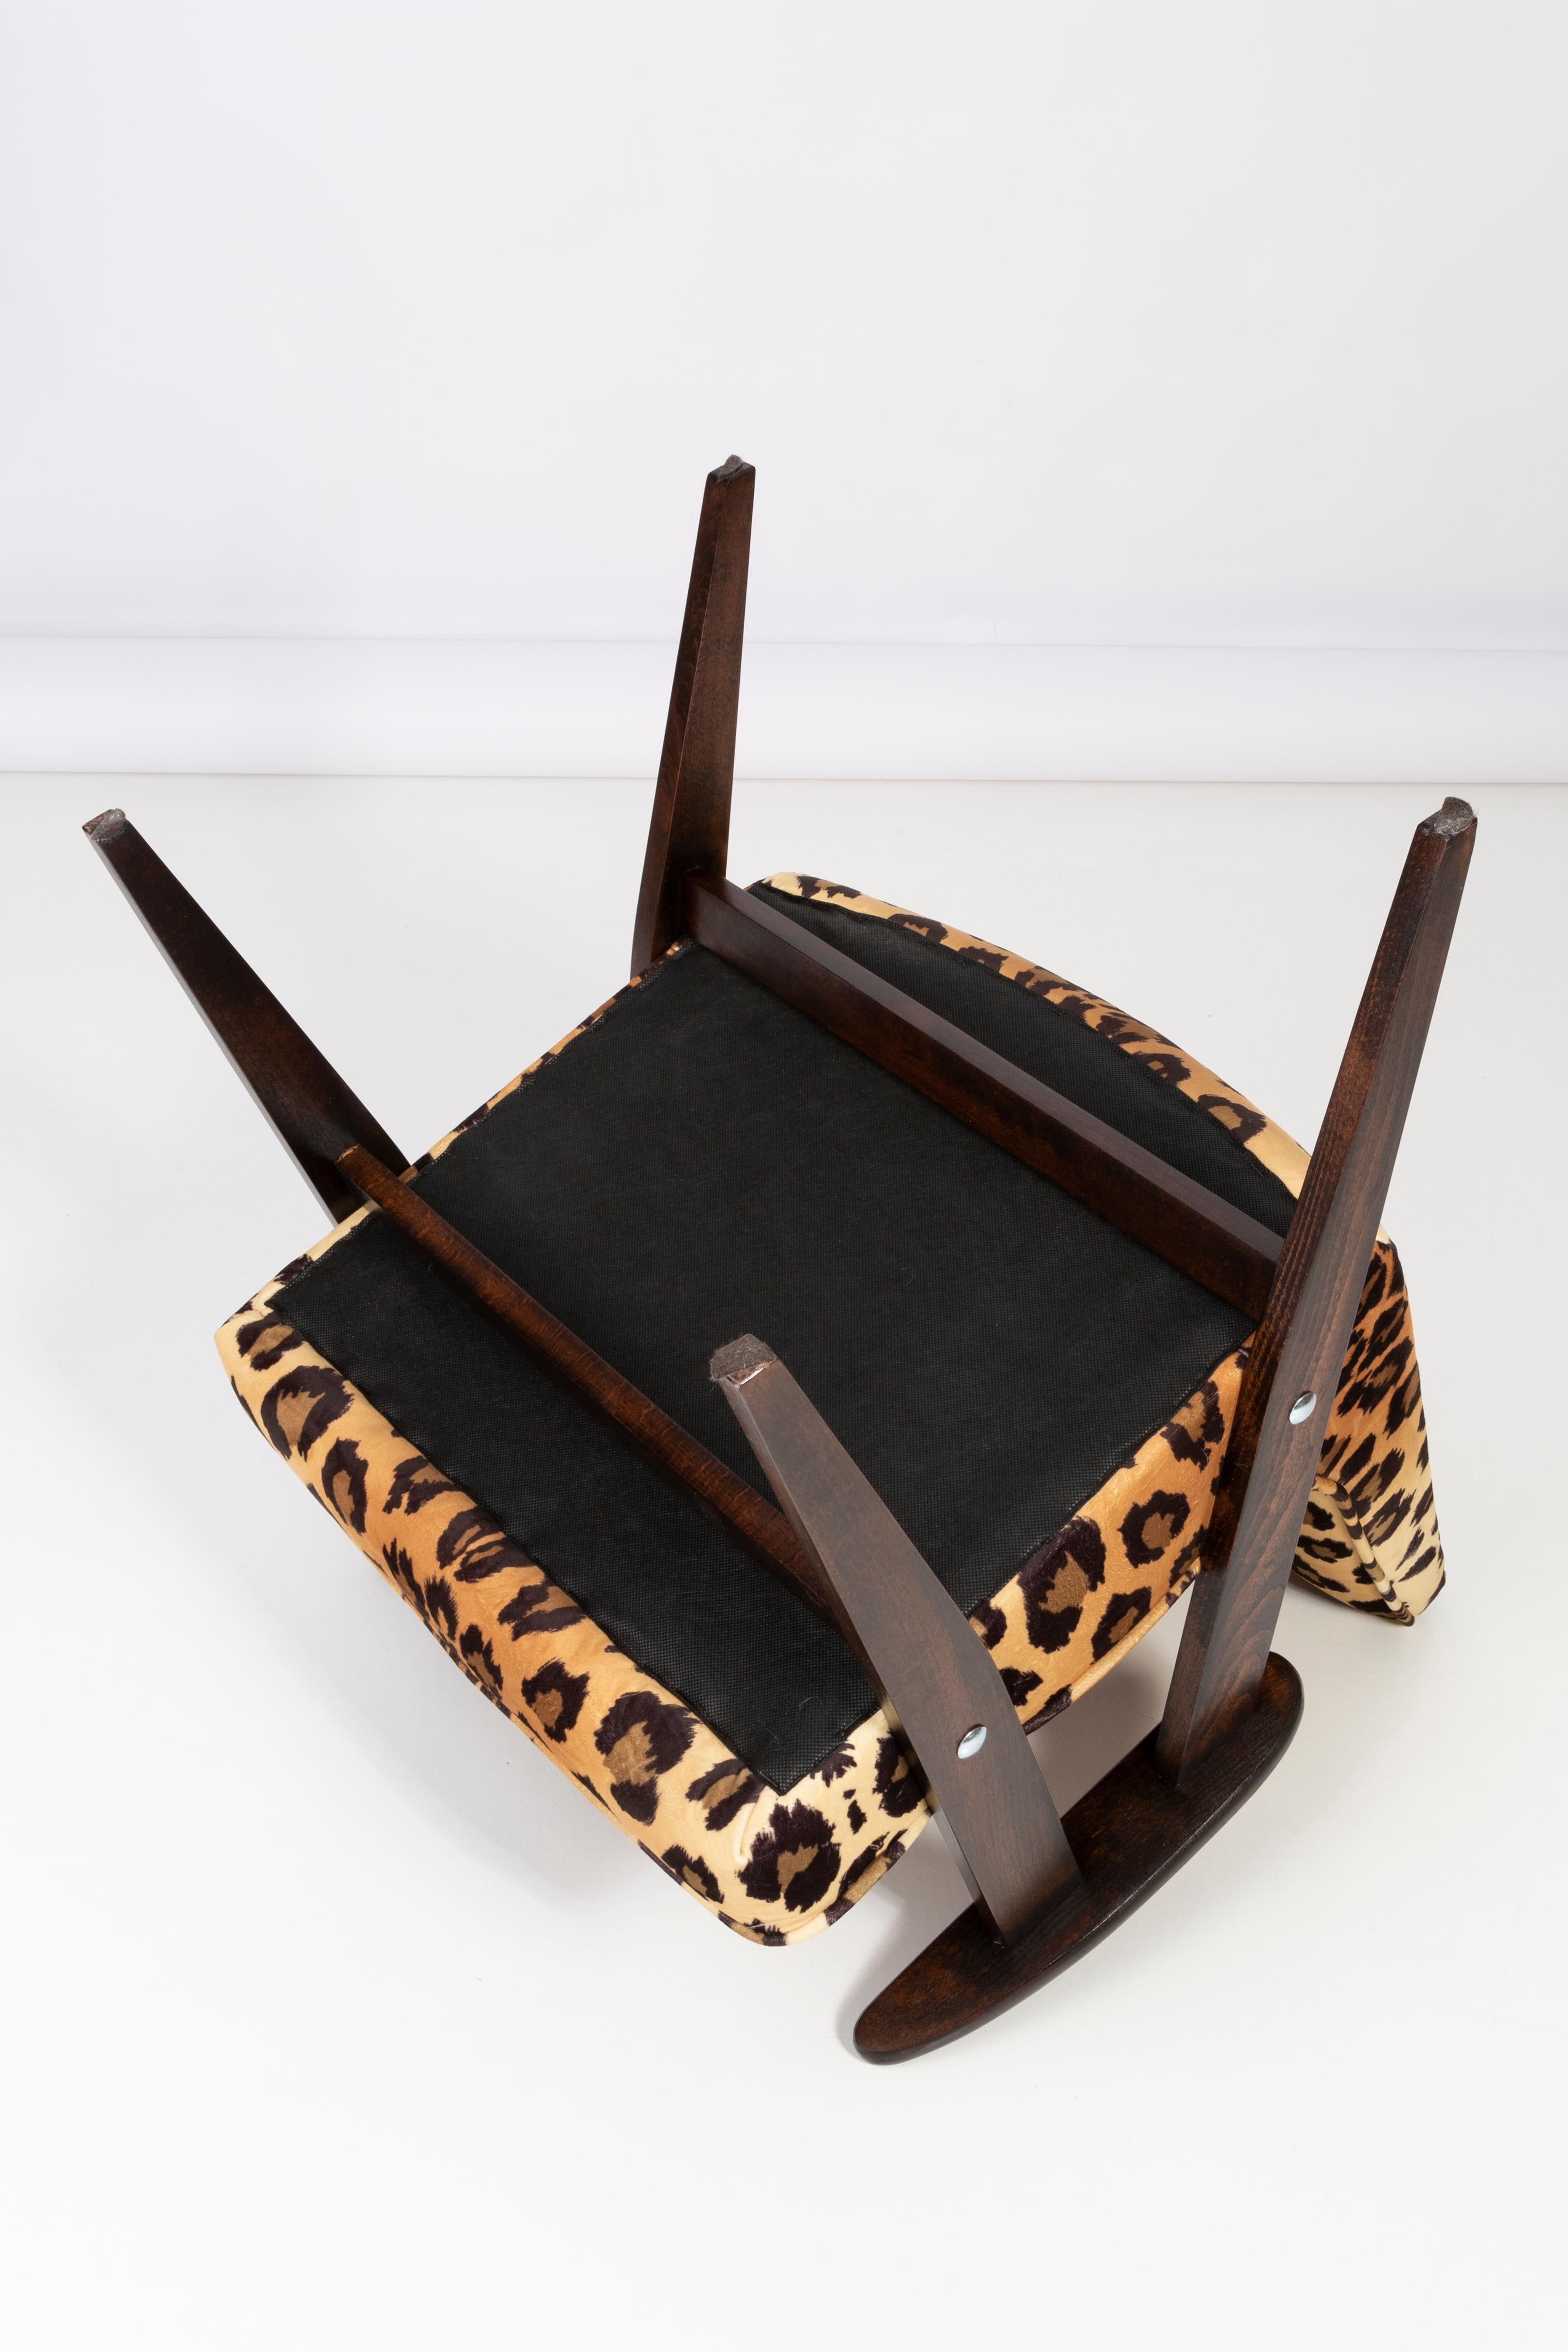 Eight Midcentury 366 Armchairs in Leopard Print Velvet, Jozef Chierowski, 1960s For Sale 4